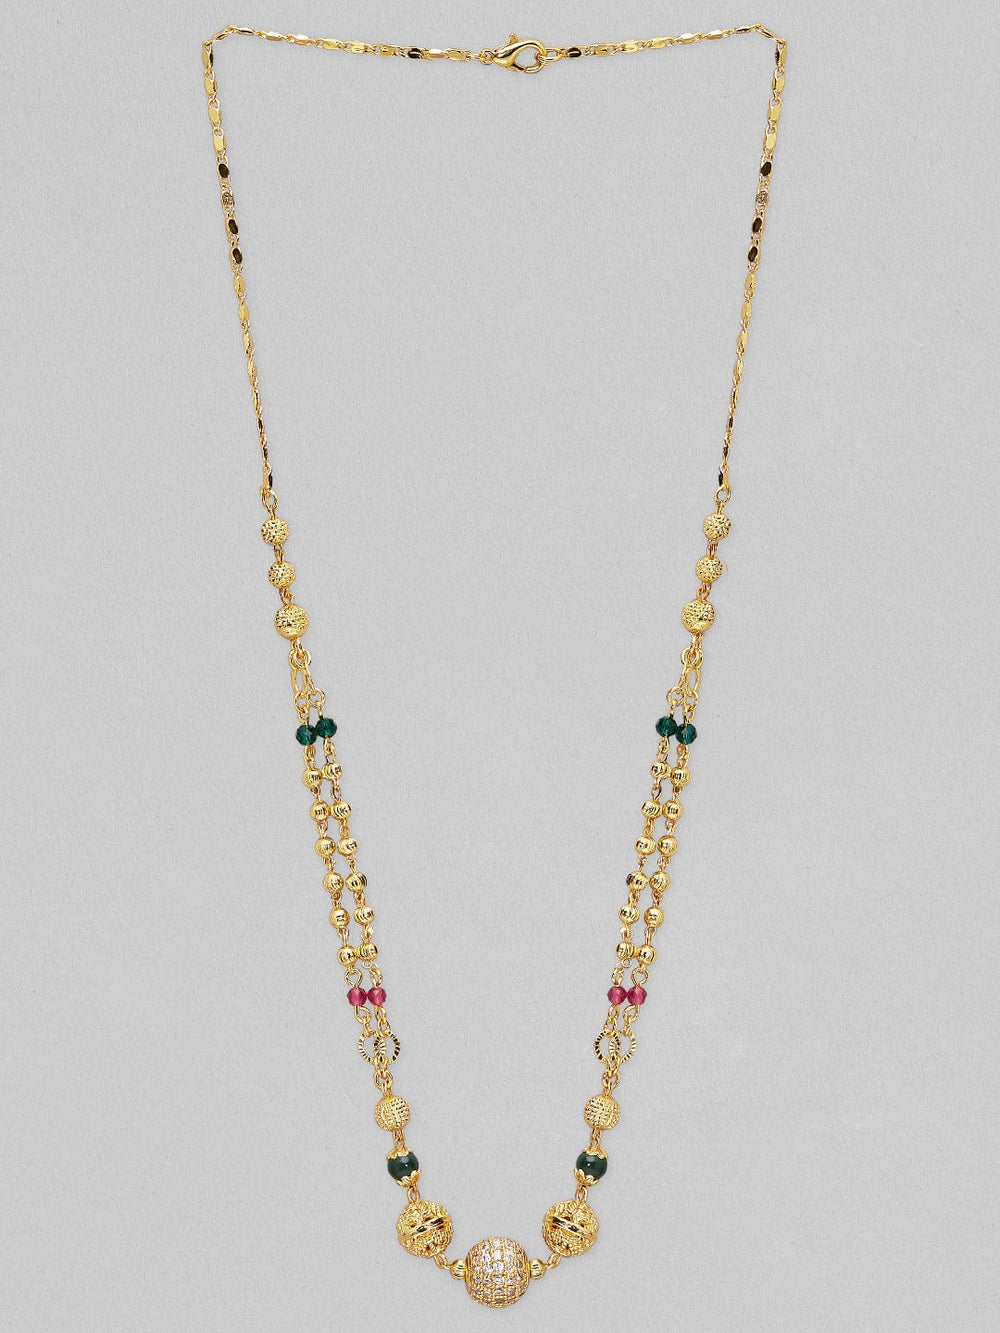 Rubans 22k Gold Plated Ethnic Neck Chain With Pink And Green Beads. Chain & Necklaces